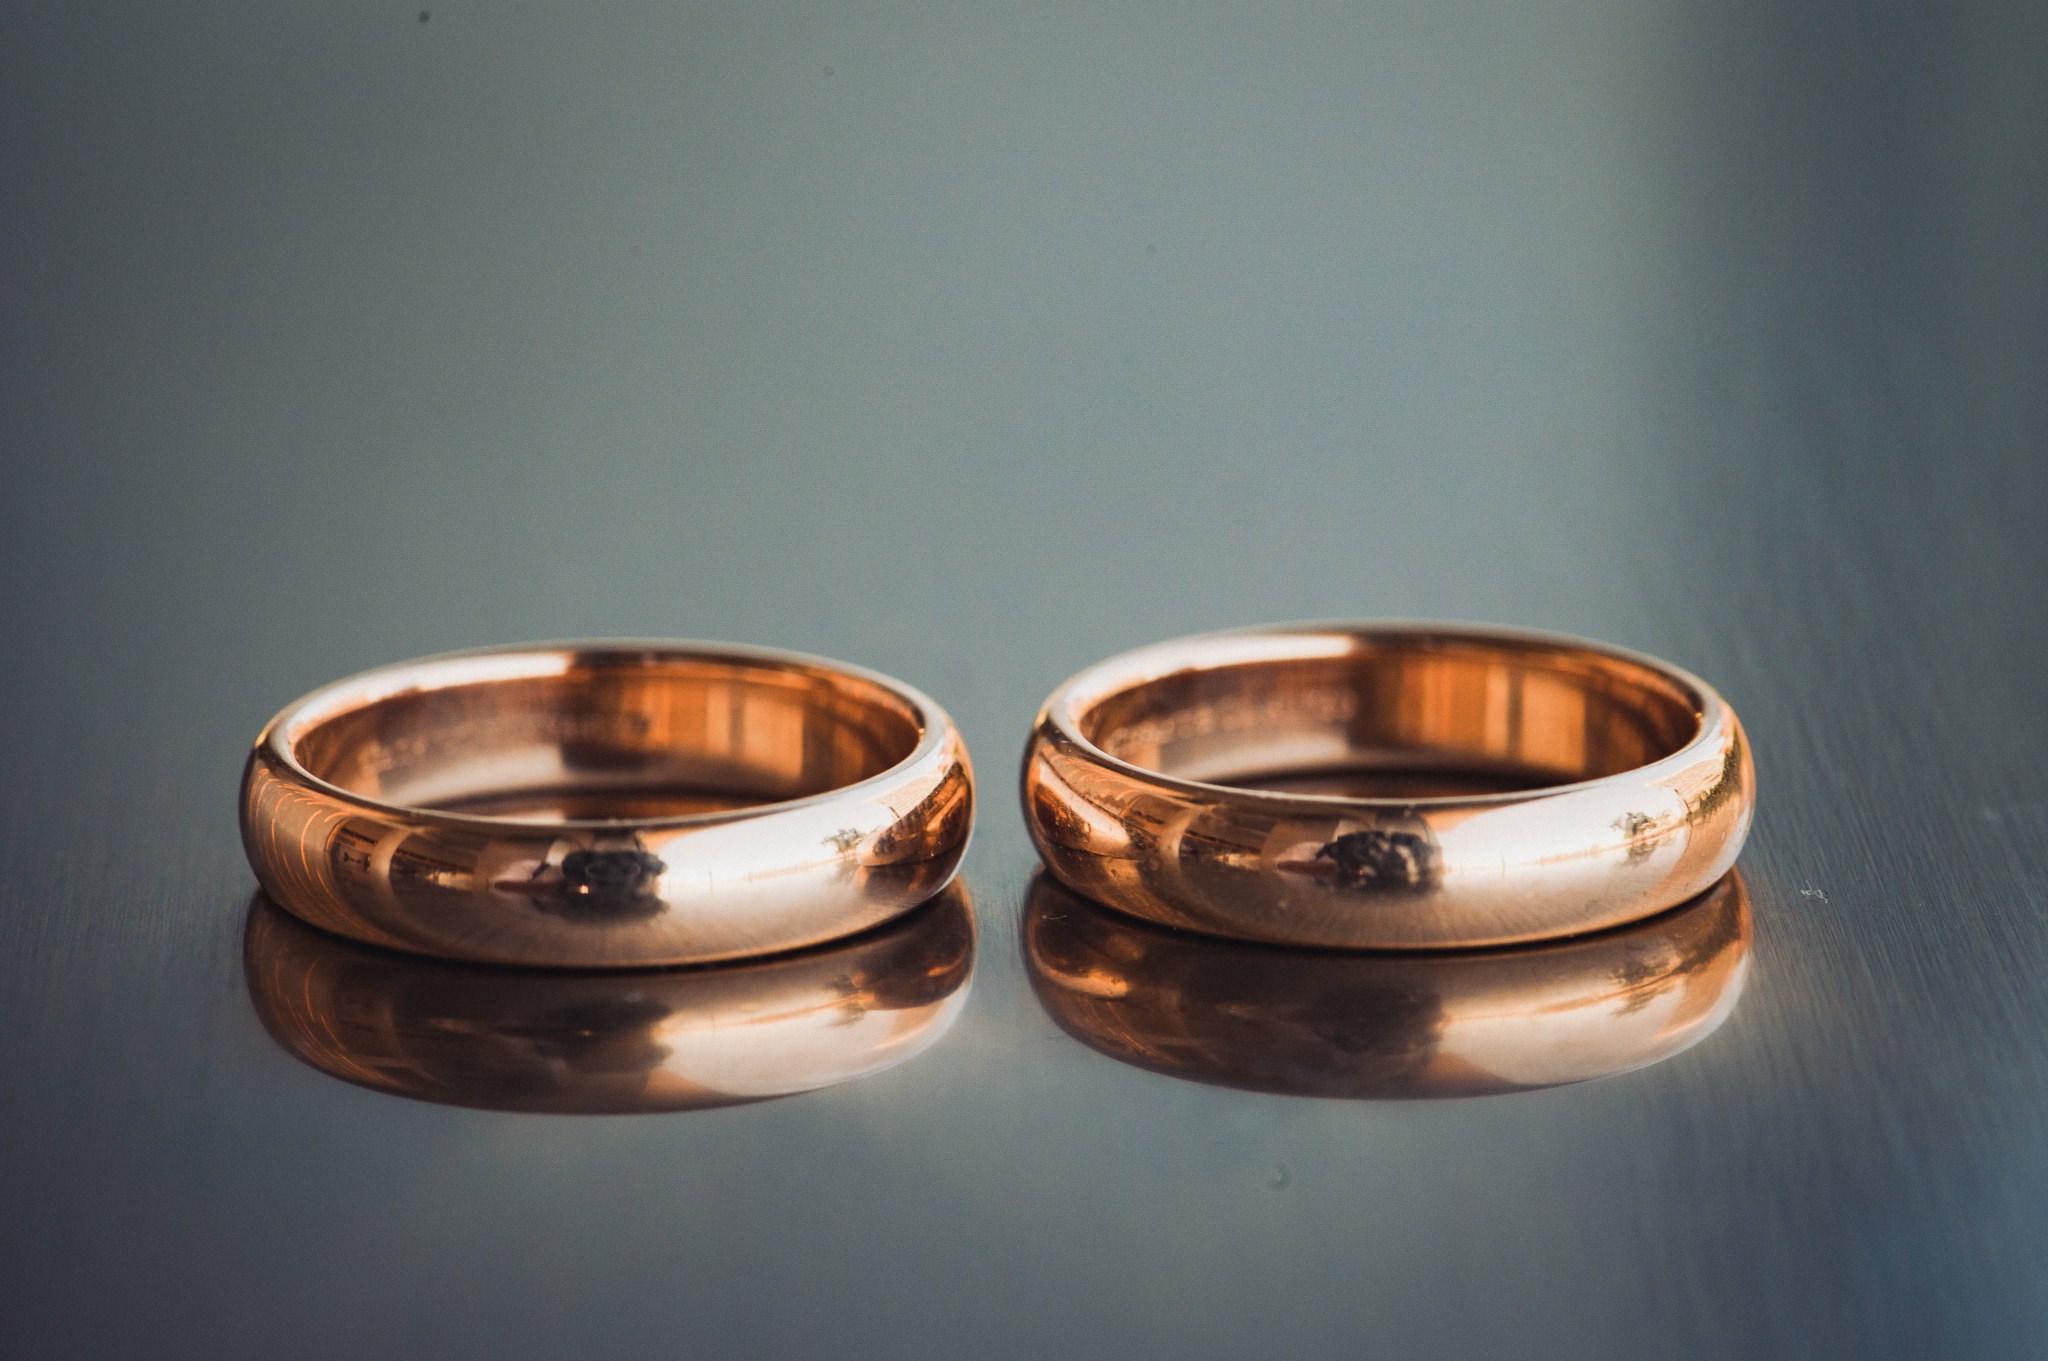  A circle has no beginning or end and is therefore a symbol of infinity. It is endless, eternal, just the way love should be. For many the wedding ring is worn on the fourth finger of the left hand. ... More recently both the bride and groom receive 